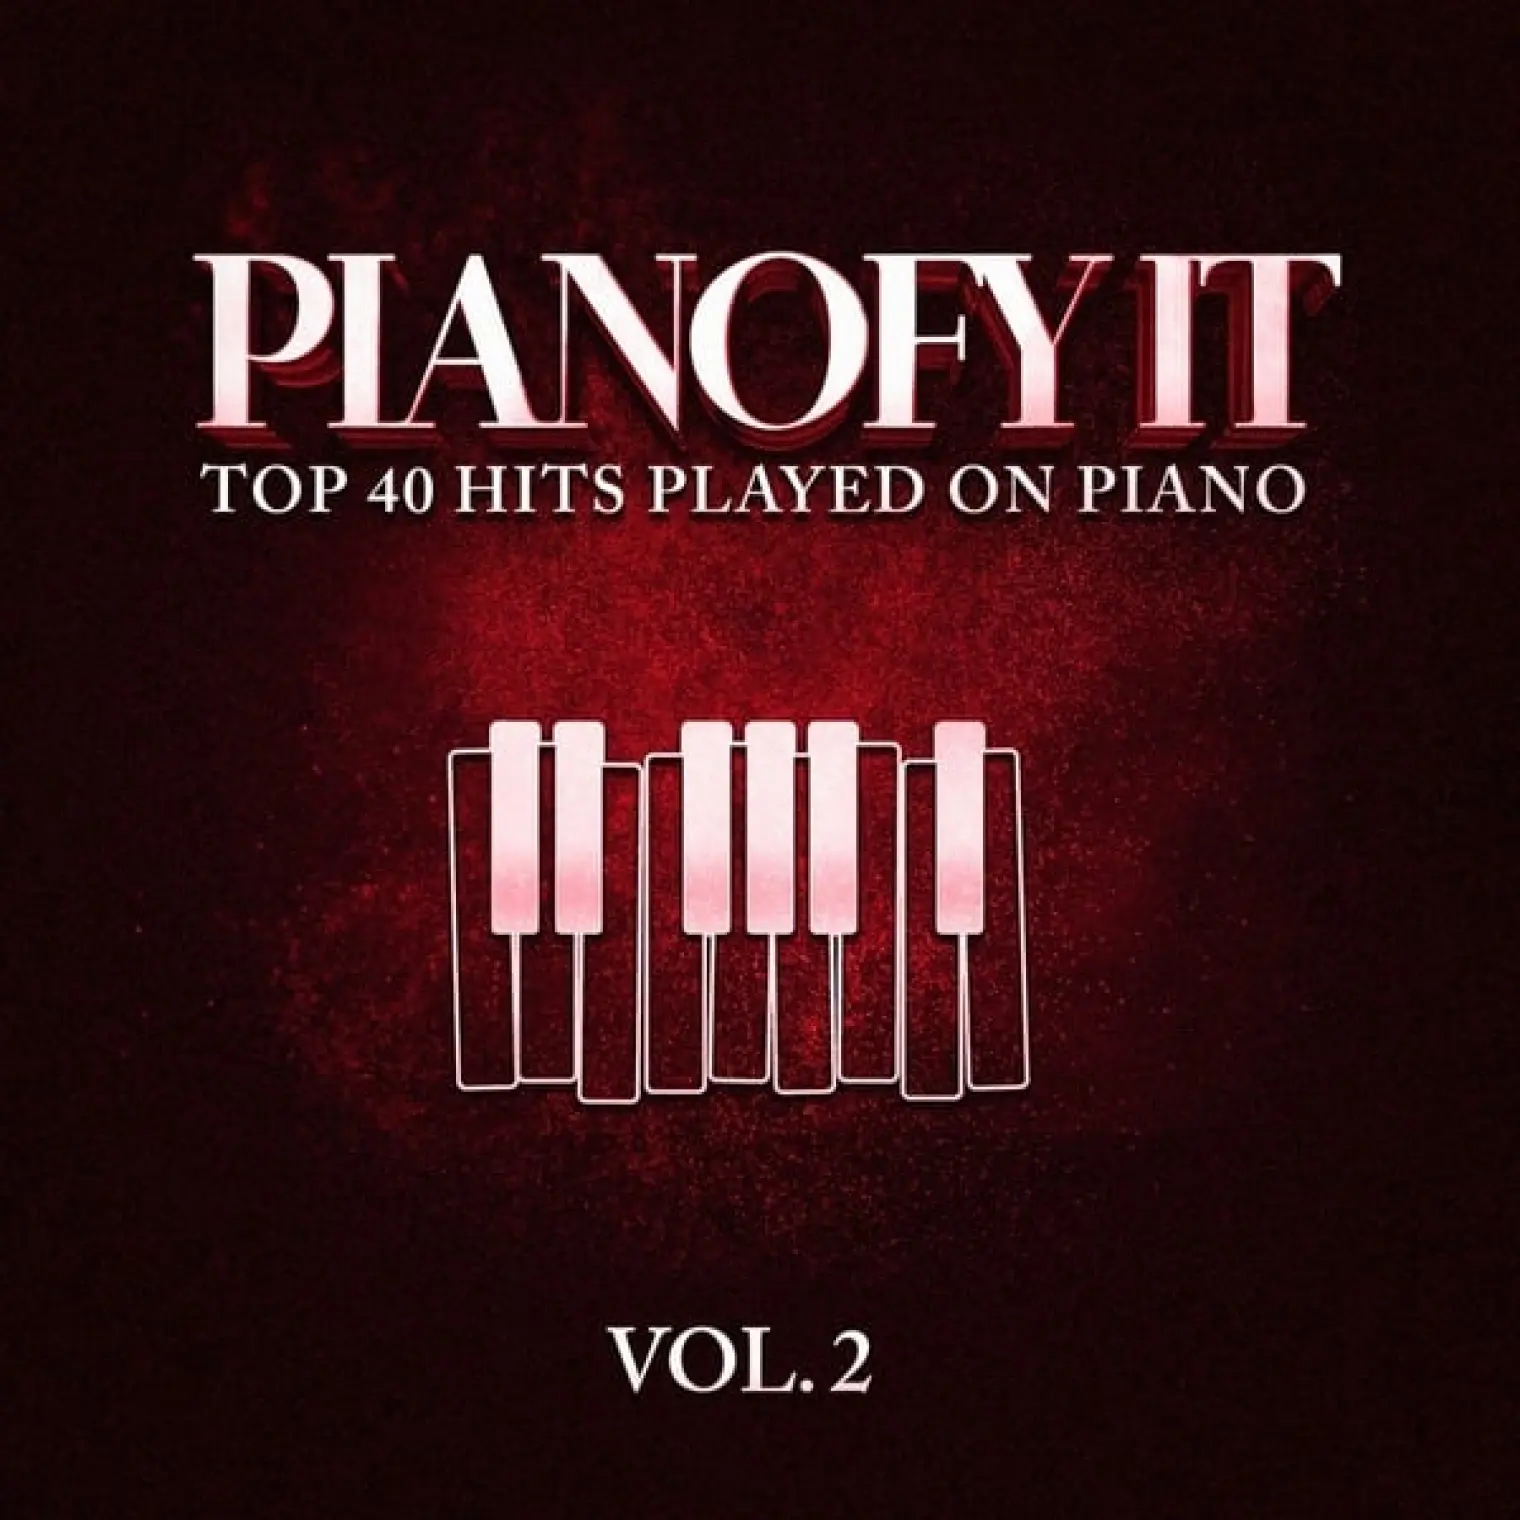 Pianofy It, Vol. 2 - Top 40 Hits Played On Piano -  Piano 